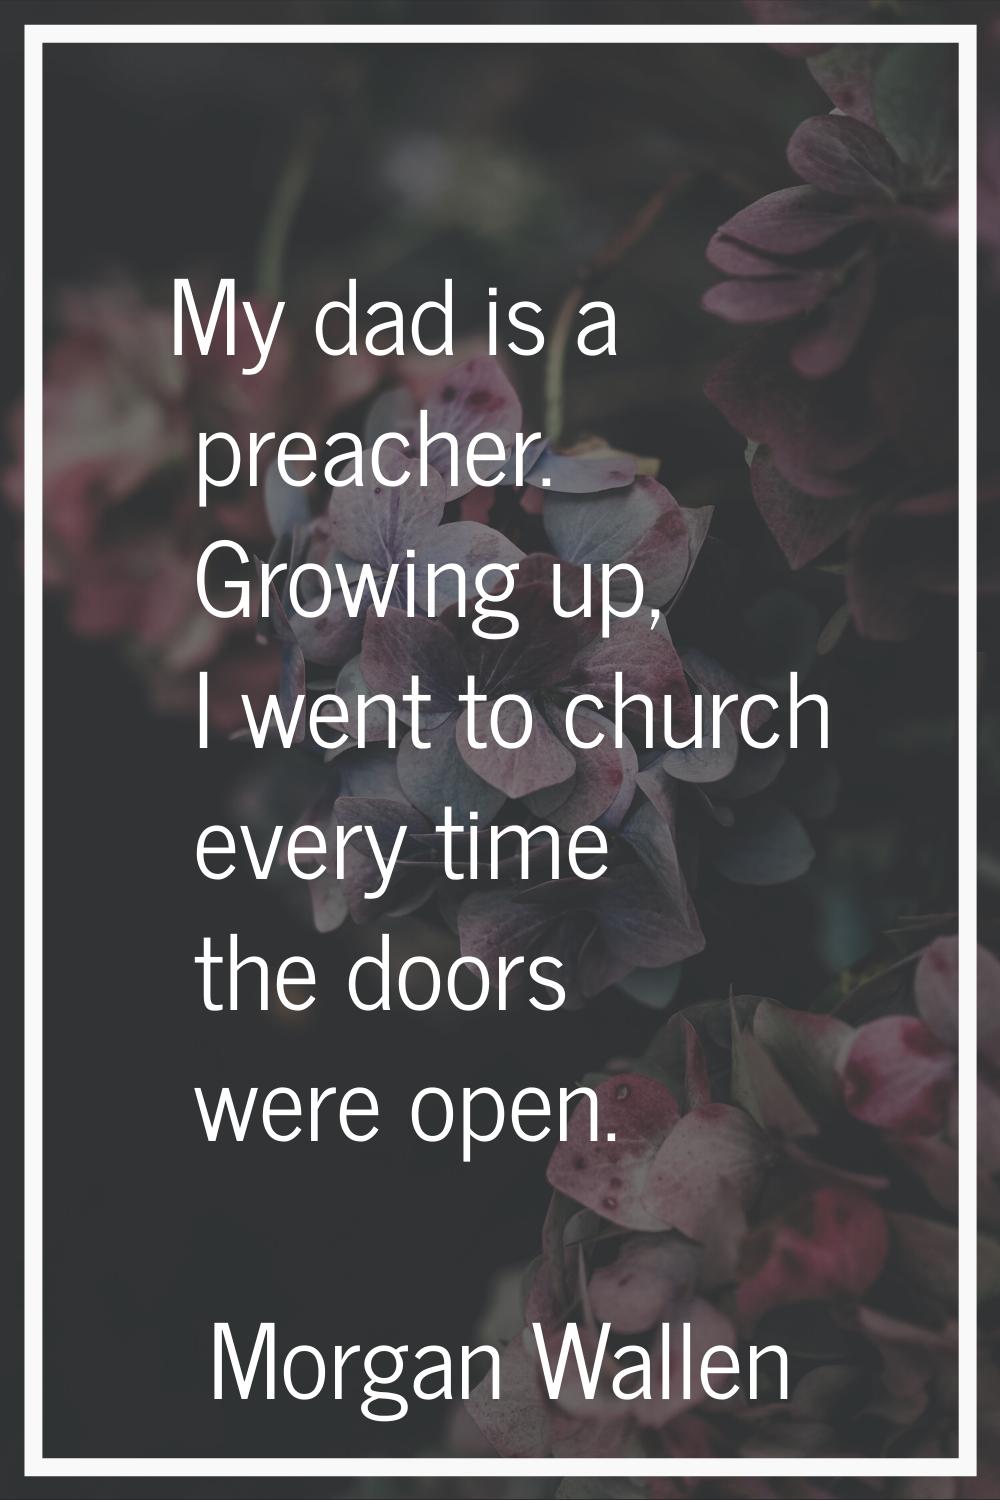 My dad is a preacher. Growing up, I went to church every time the doors were open.